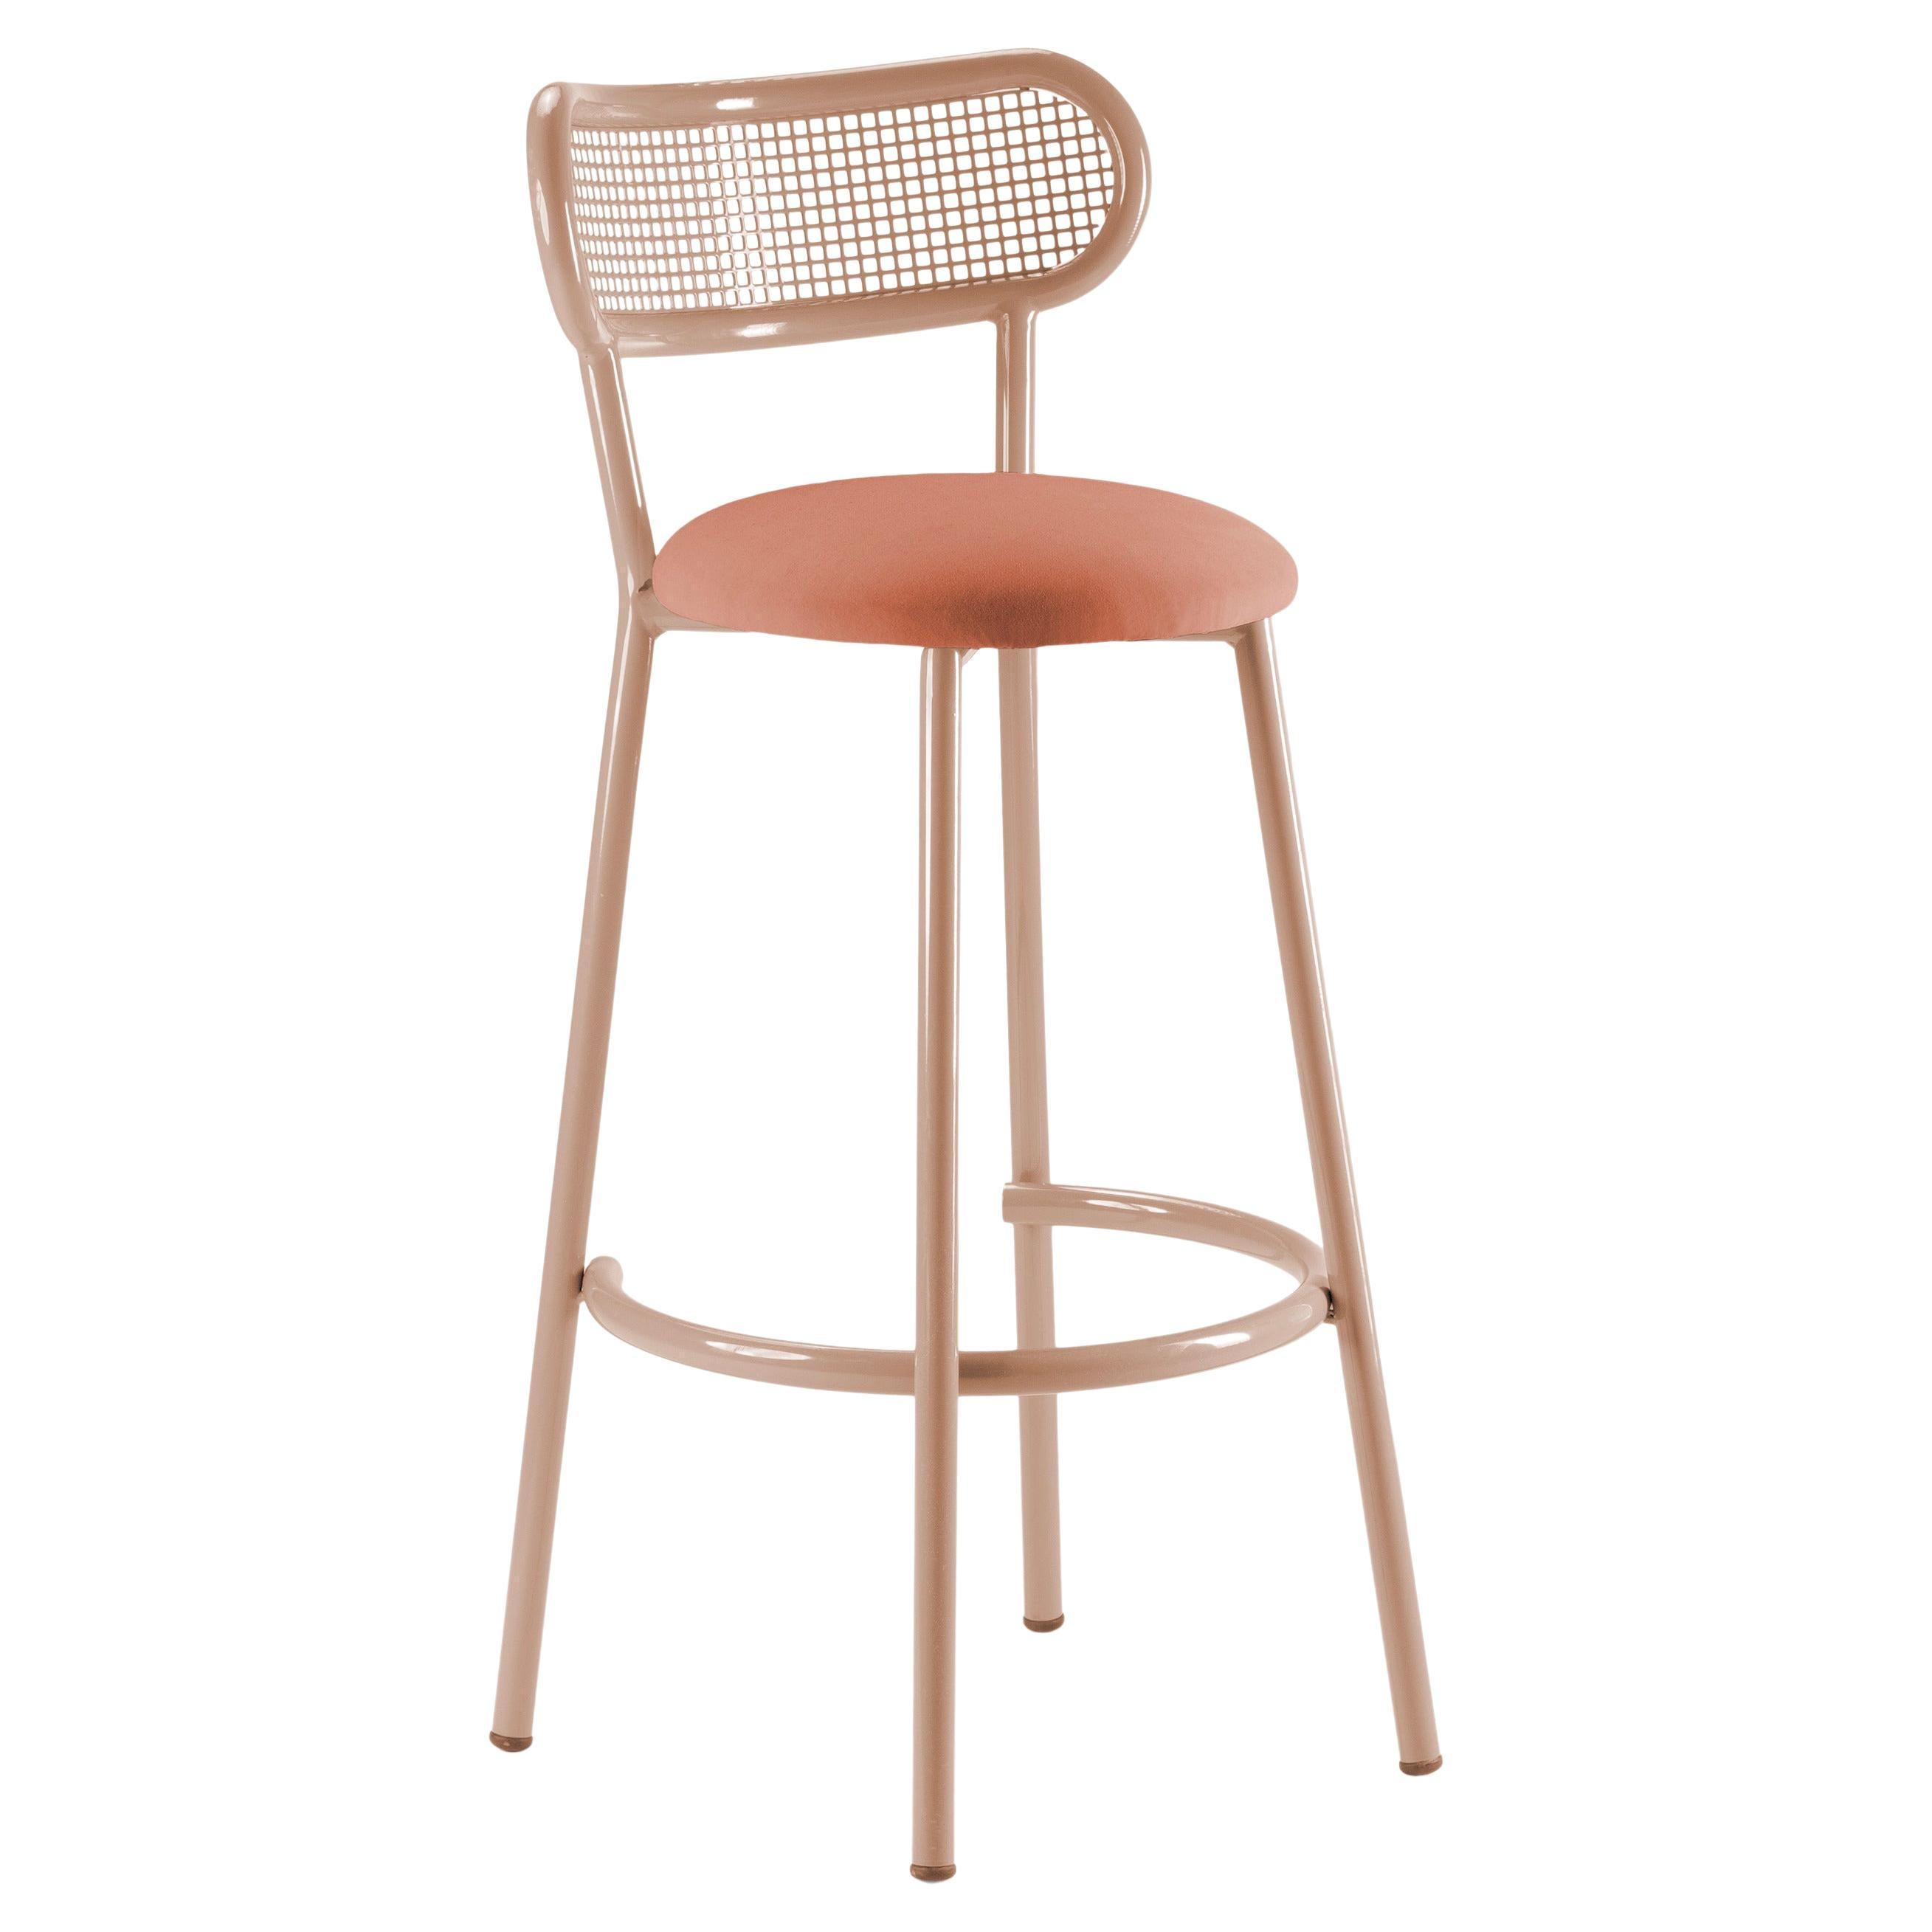 Intended for modern working, dining, and living, the Louise chair combines a clean, steel structure, perforated steel back and upholstery resulting in an effortless modern classic that is perfectly proportioned.
The Louise chairs can evoke such